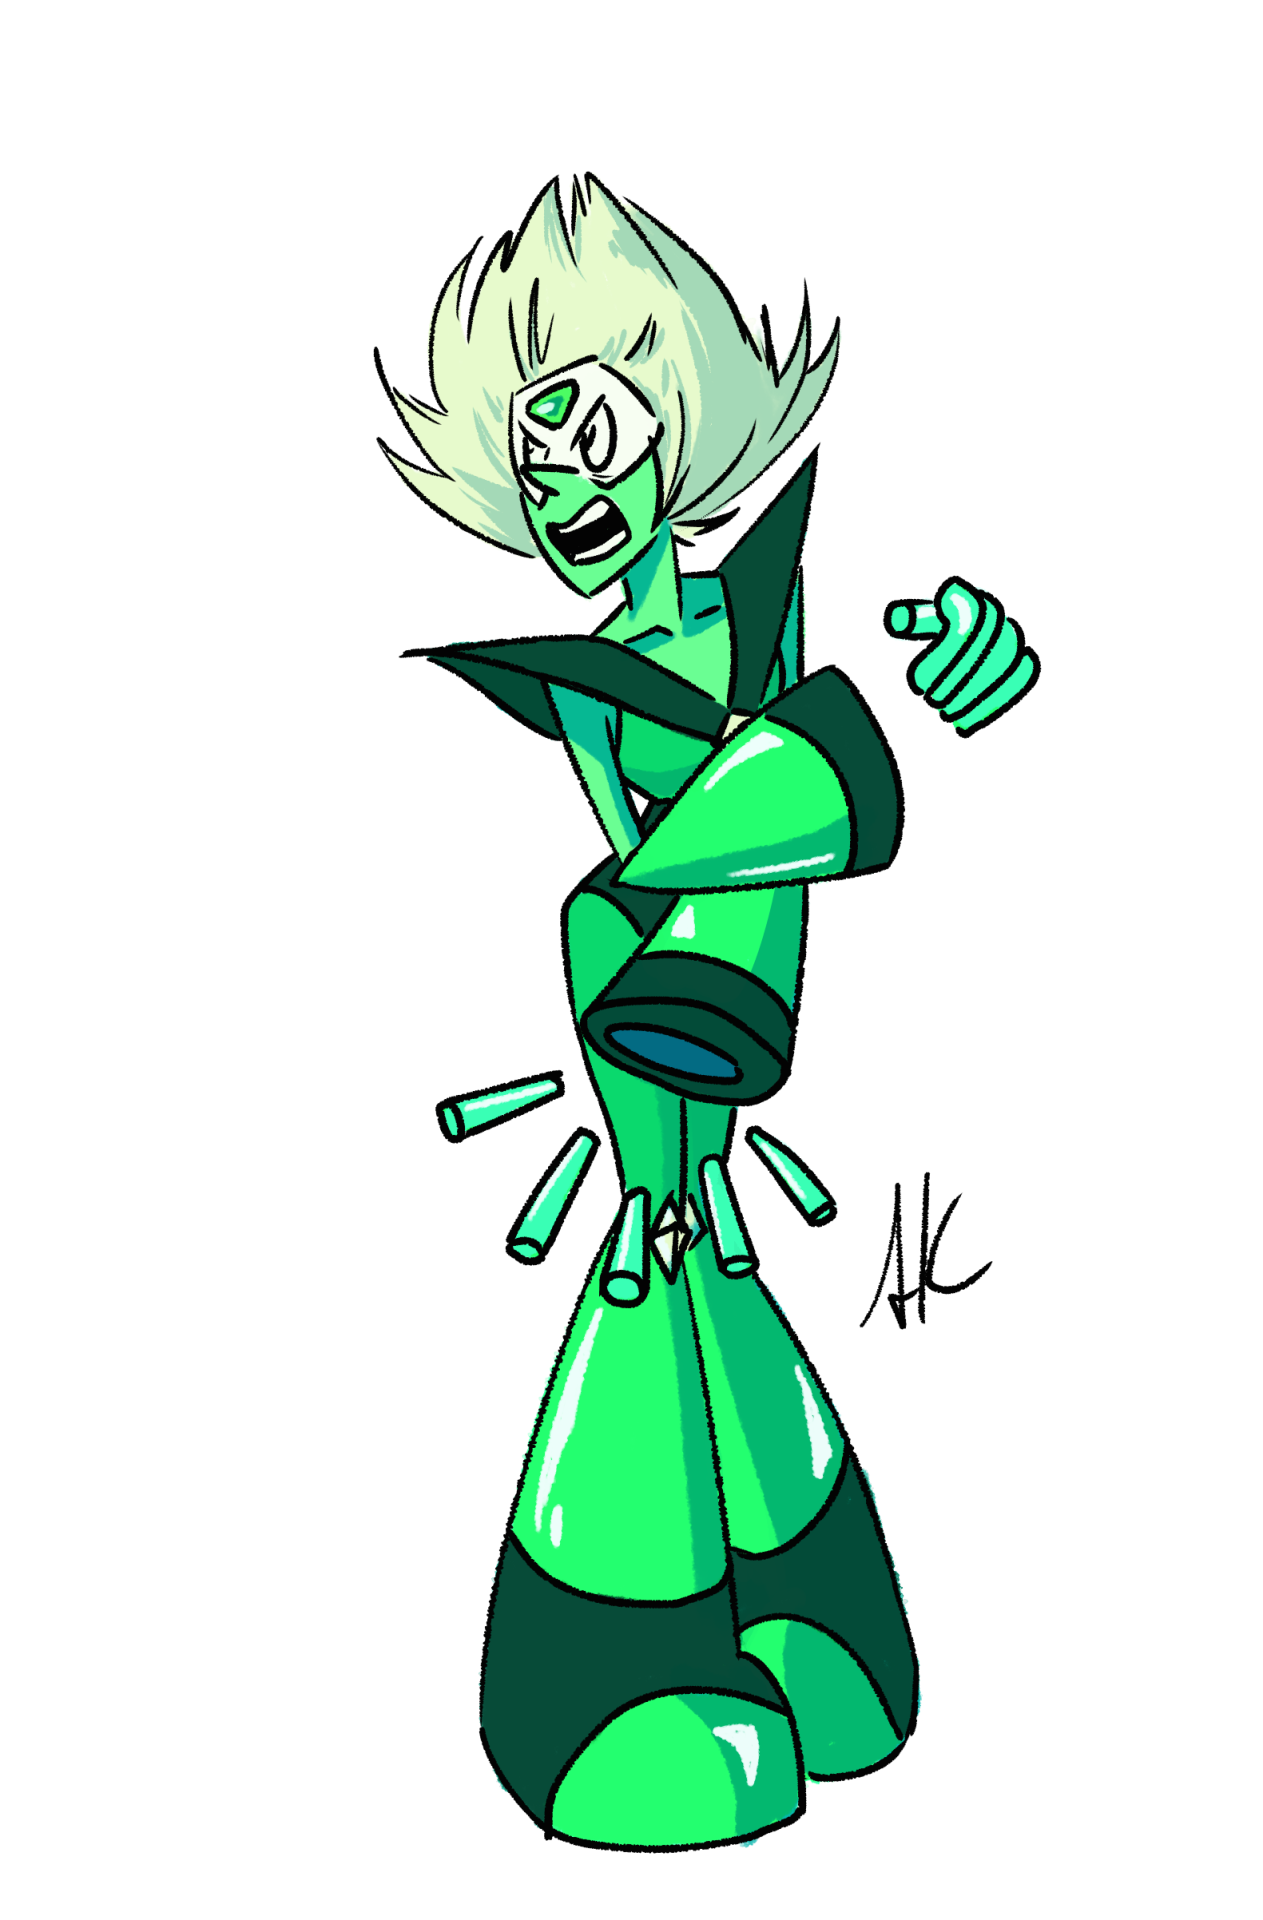 there used to be a smug homeworld amethyst on the left but i got too tired
kinda-redraw of the first time i drew peridot